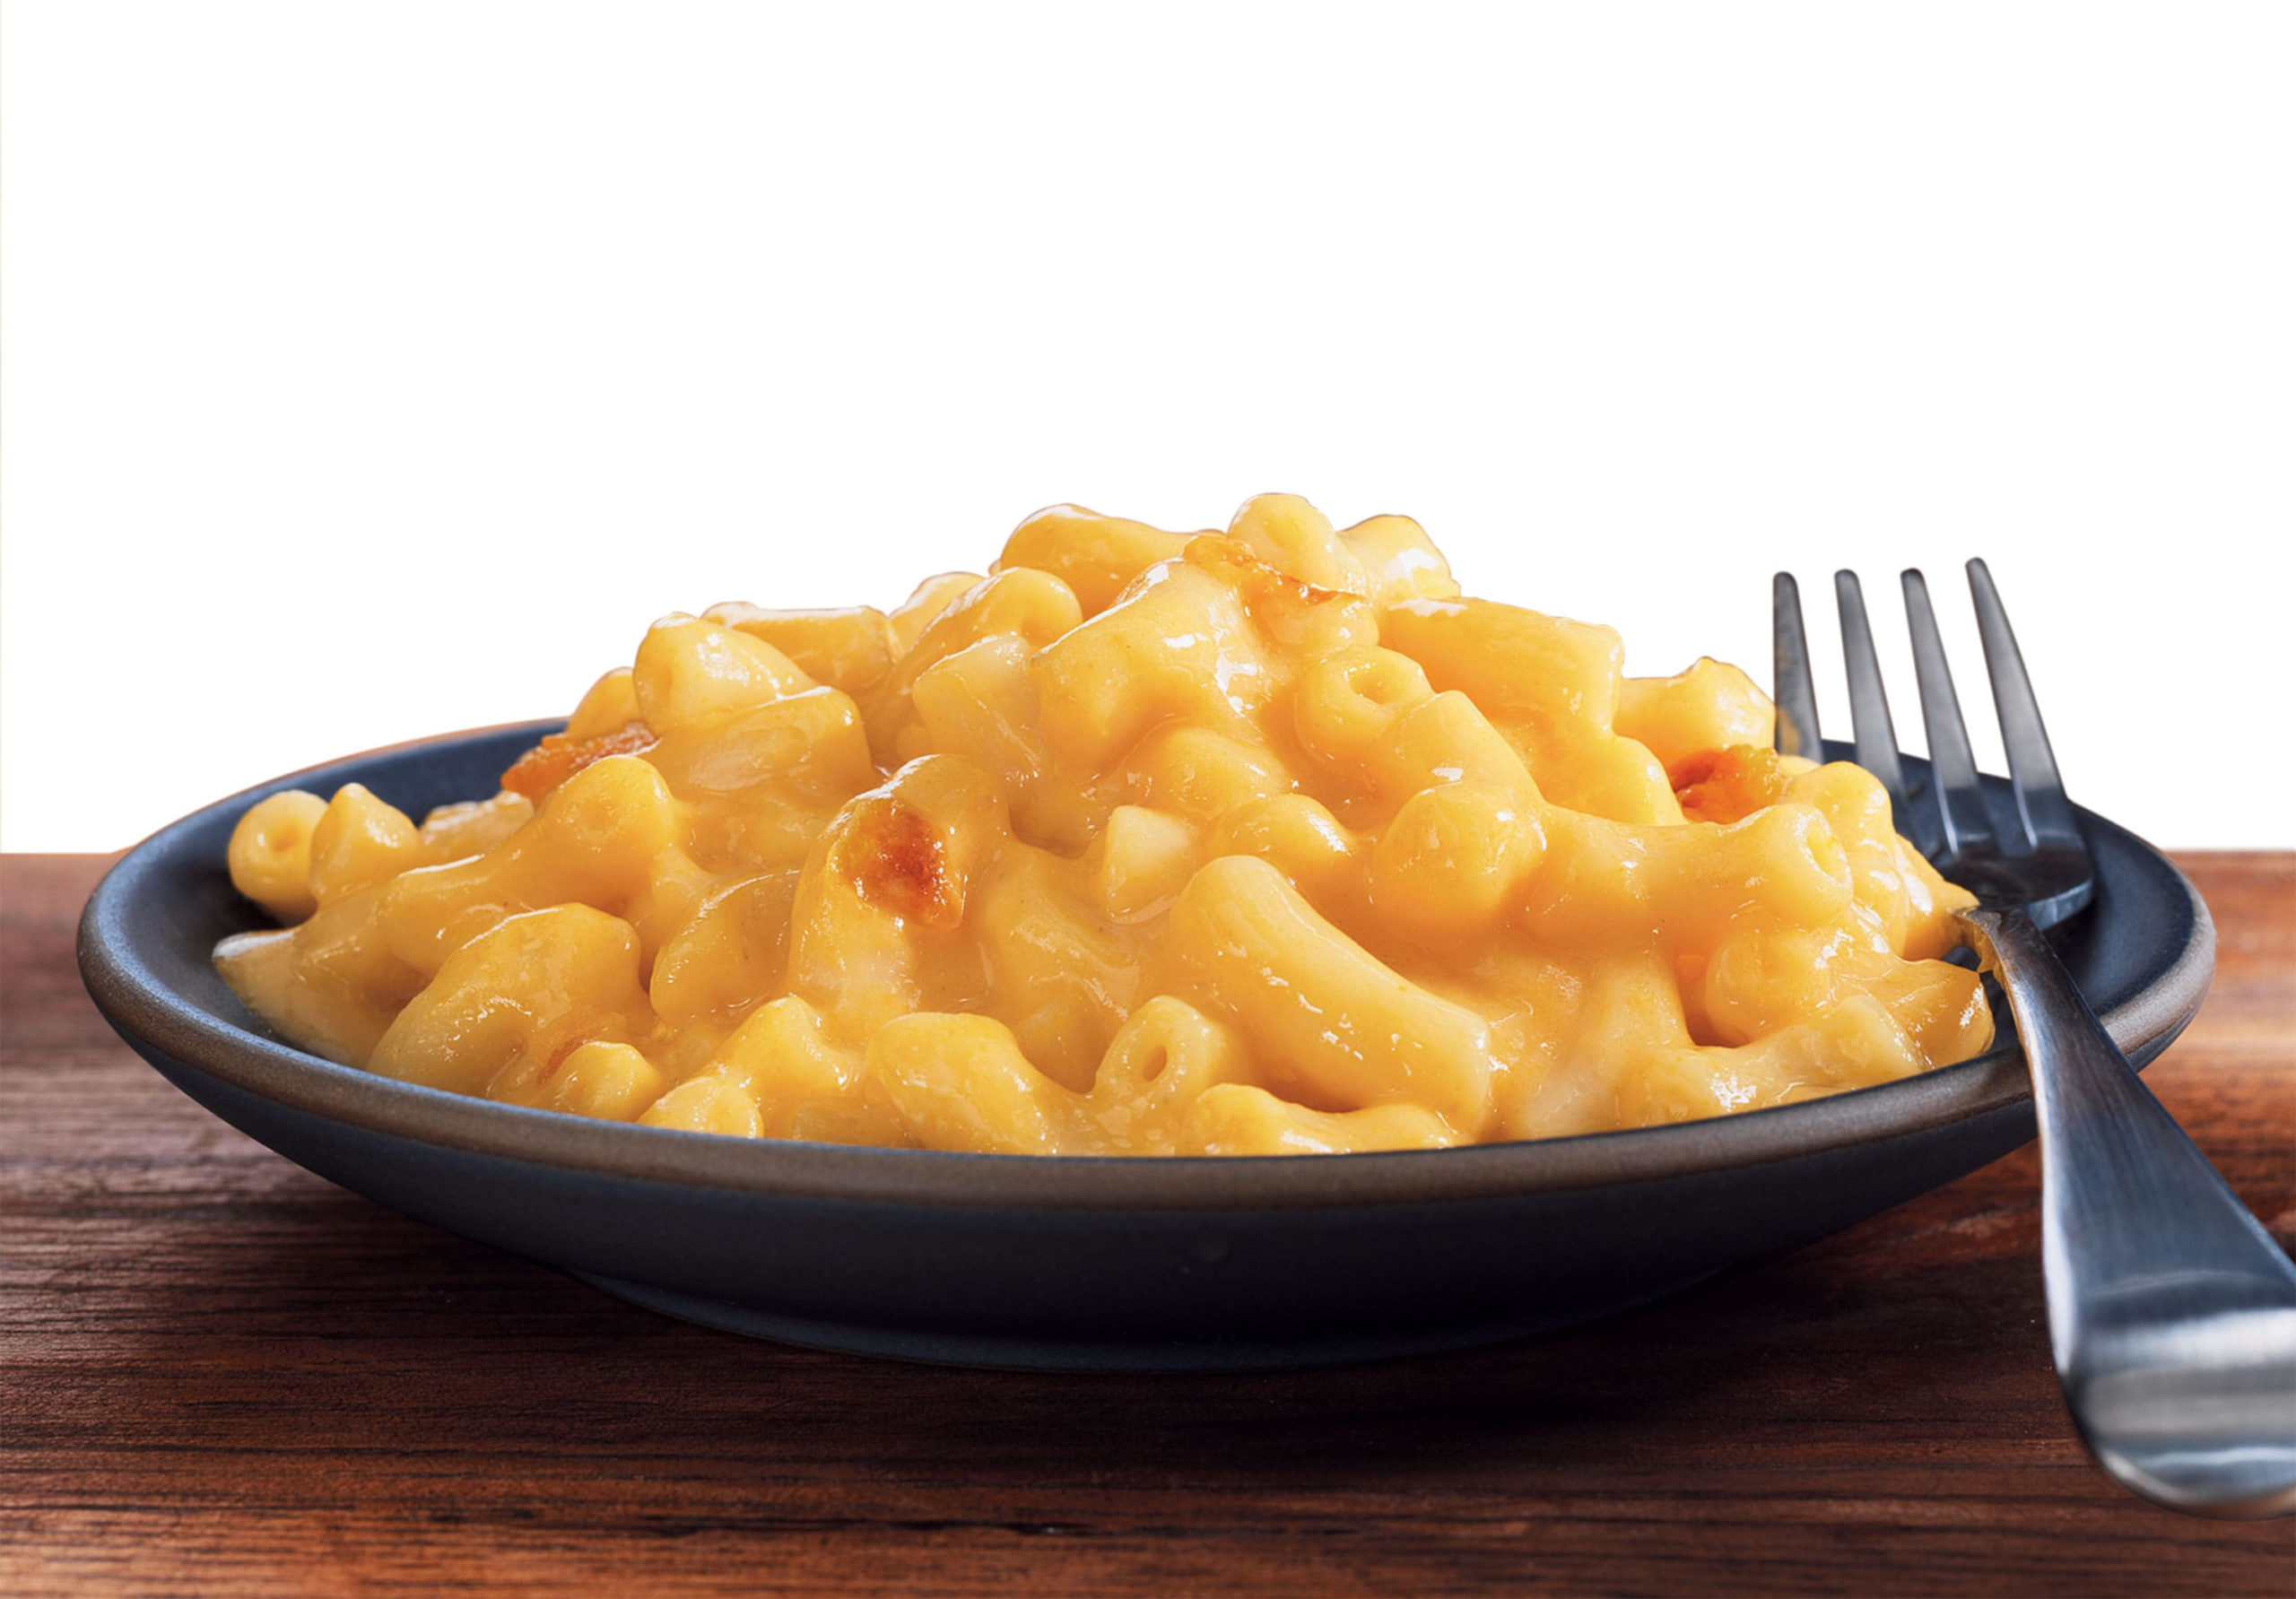 mac-and-cheese-for-one-fresh-macaroni-amp-cheese-classics-frozen-meals-of-mac-and-cheese-for-one.jpg